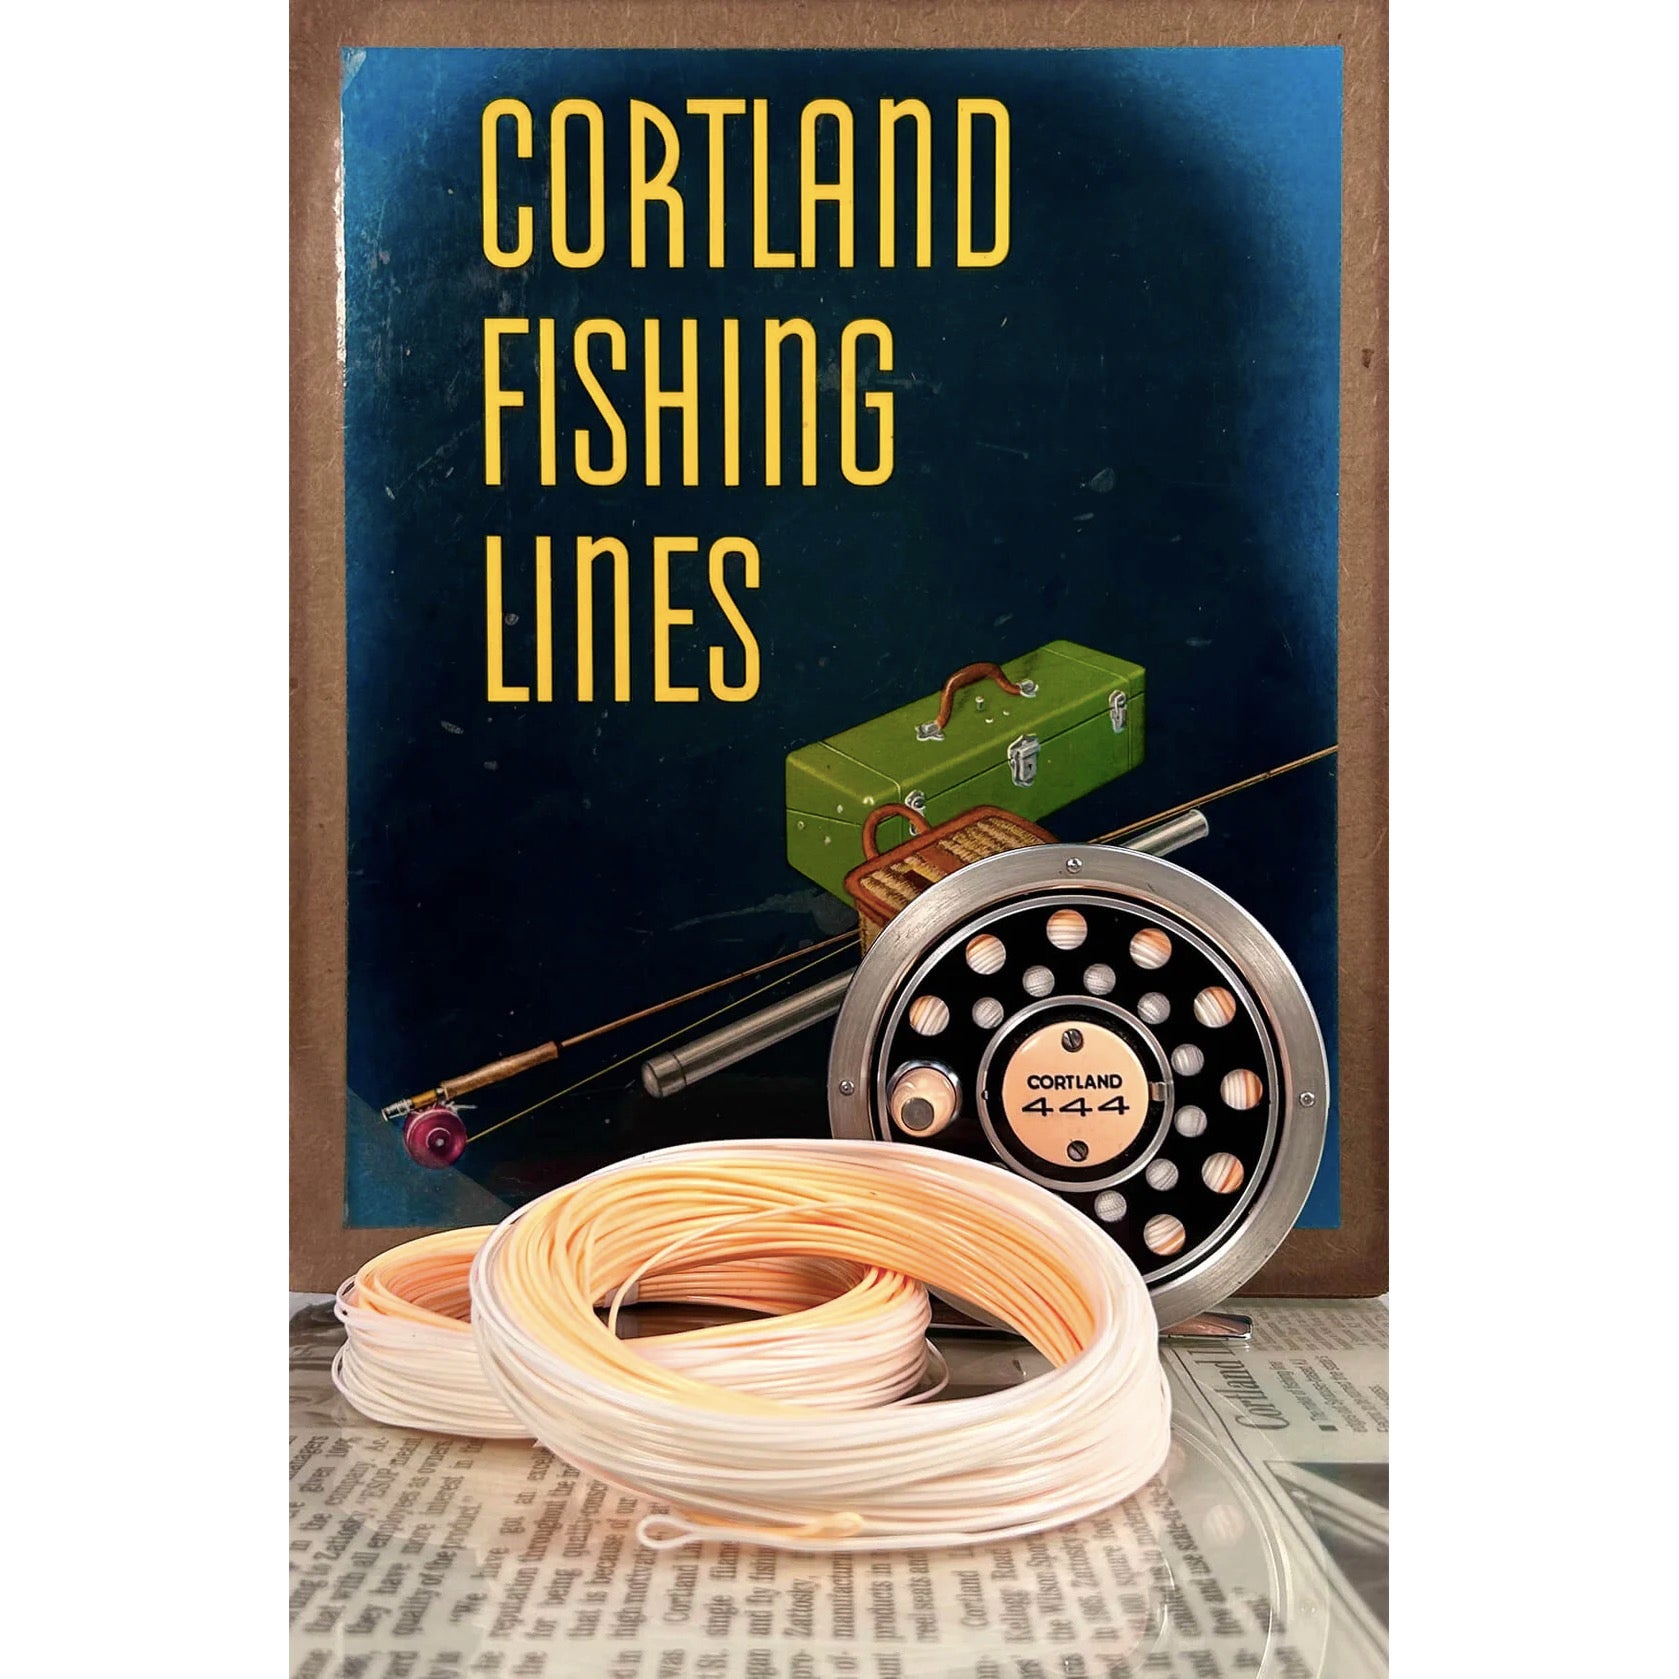 Cortland Peaches & Cream Limited Edition Fly Line – Bear's Den Fly Fishing  Co.